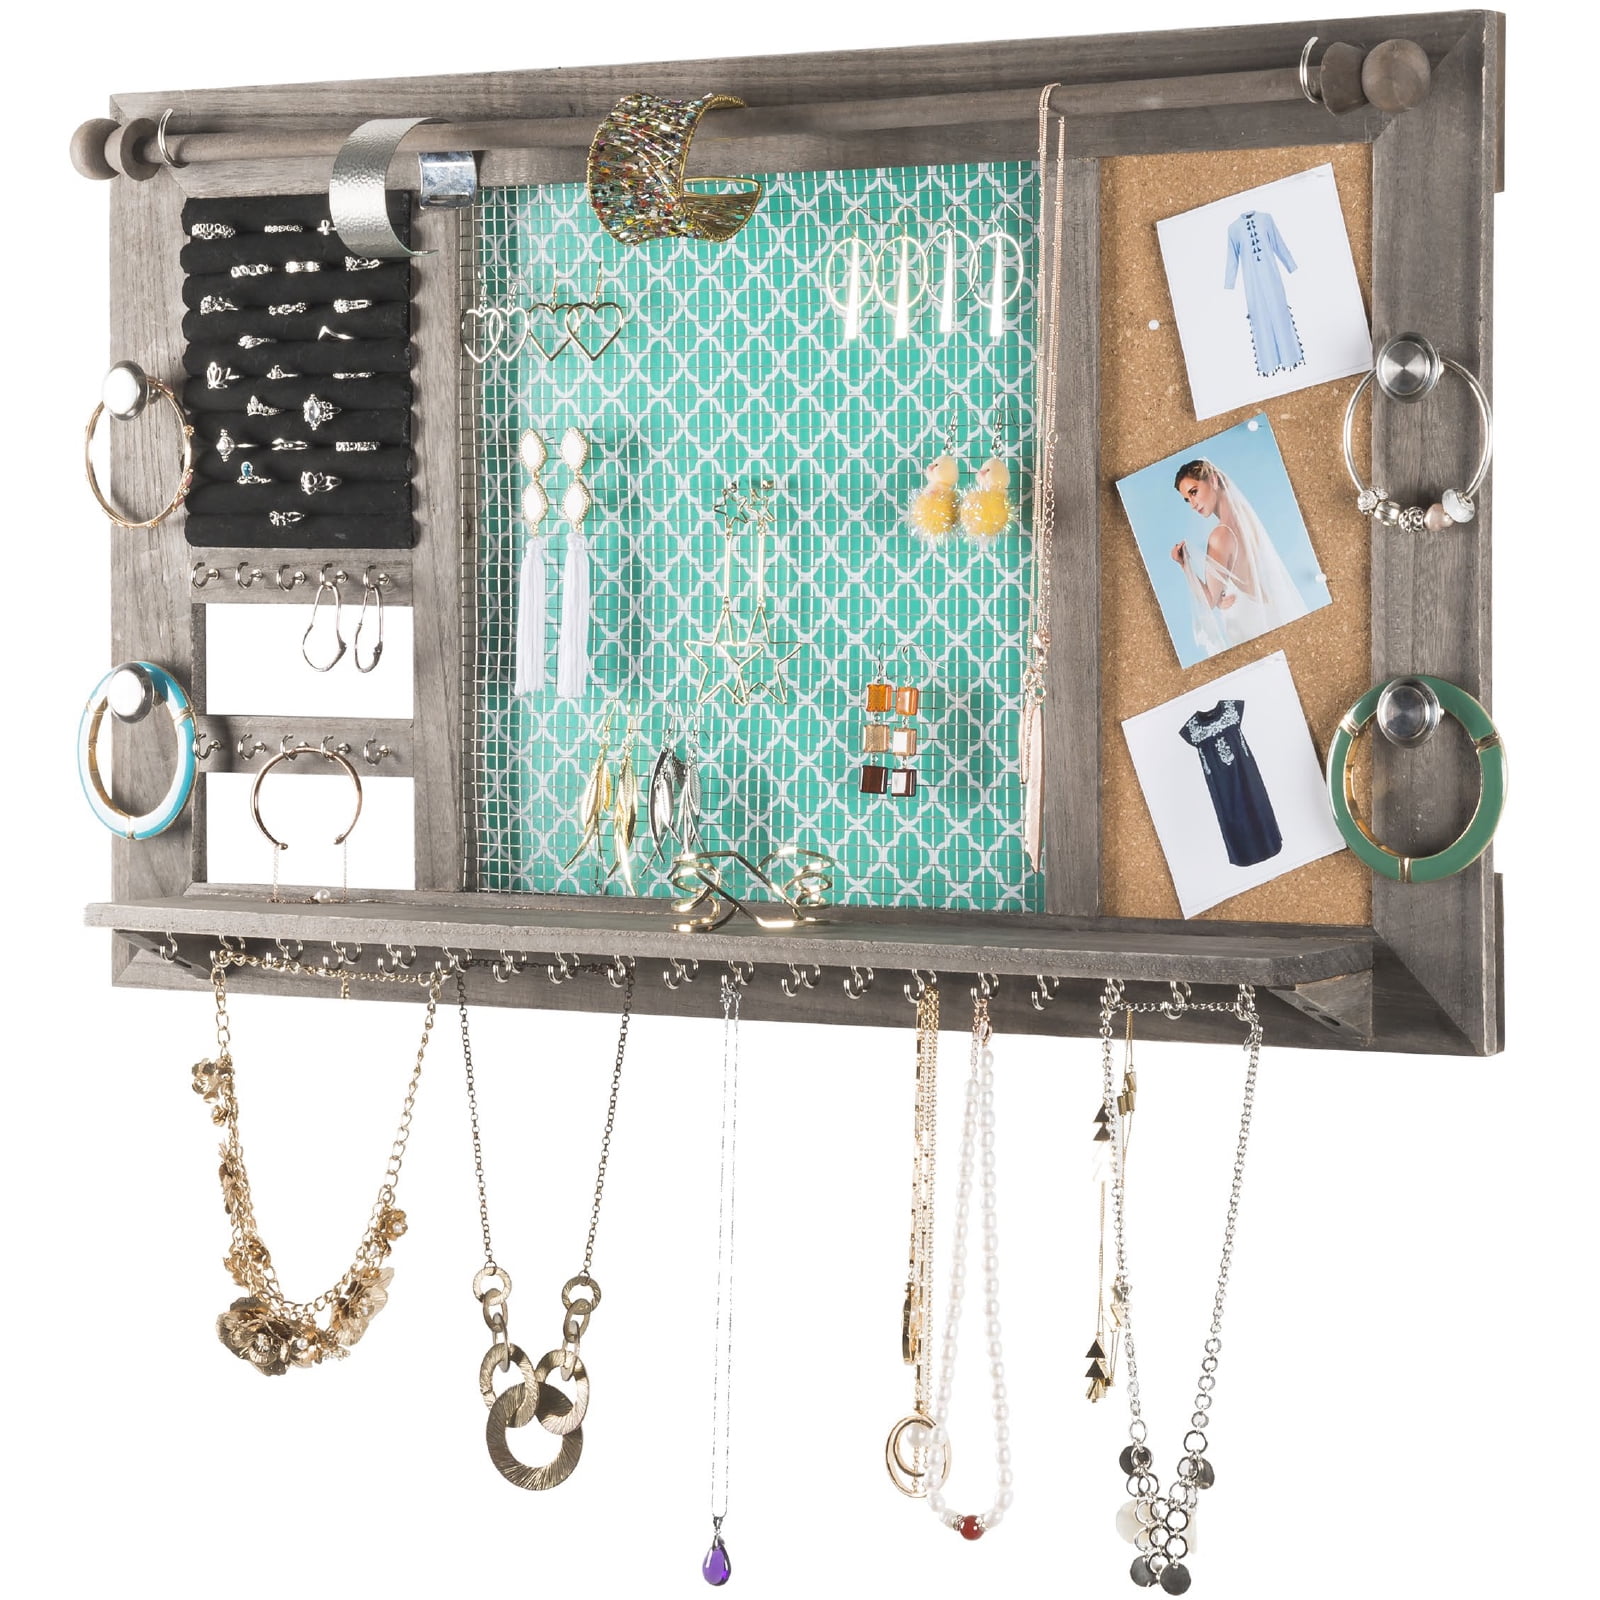 Excello Global Products Rustic Wall Mounted Jewelry Organizer Shabby Chic Jewelry Box Alternative with 5 INTERCHANGABLE Background Options/Bracelet Organizer/Necklace Holder/Earring Organizer